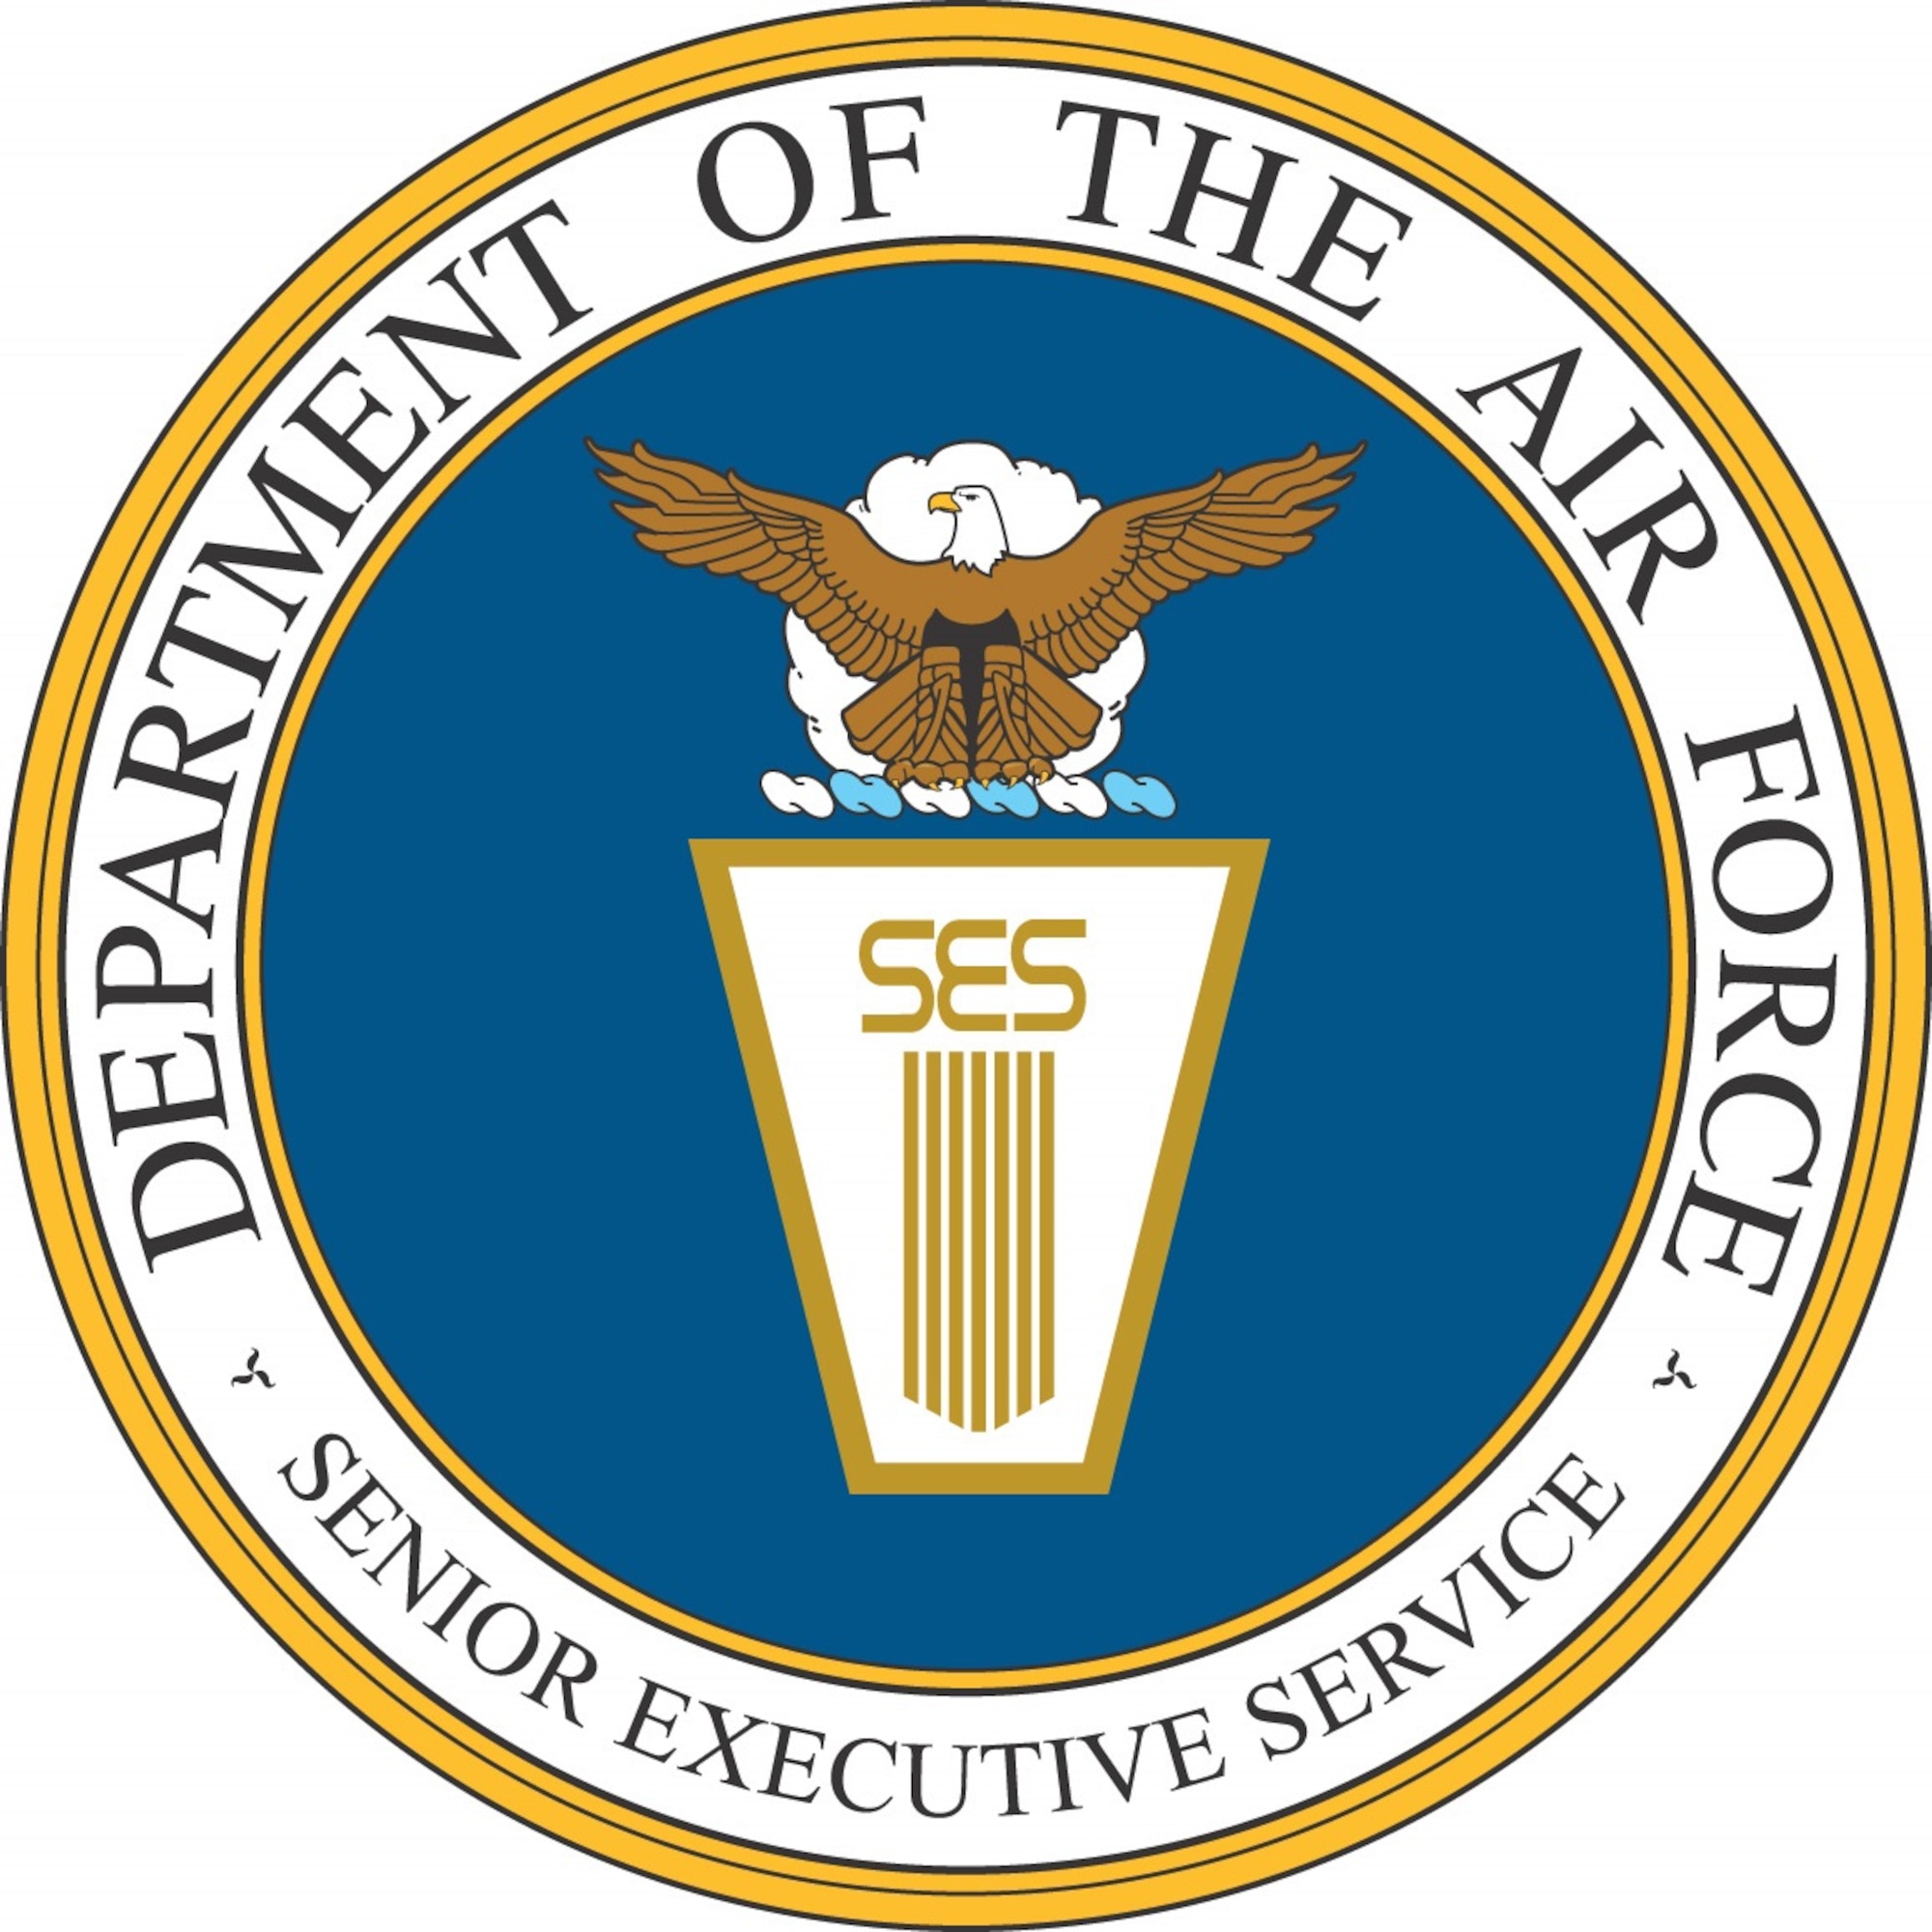 The SES is a position classification in the civil service of the United States federal government, equivalent to general officer or flag officer ranks in the U.S. Armed Forces. It was created in 1979 when the Civil Service Reform Act of 1978 went into effect under.  President Jimmy Carter. According to the Office of Personnel Management, the SES was designed to be a corps of executives selected for their leadership qualifications, serving in key positions just below the top Presidential appointees as a link between them and the rest of the Federal (civil service) workforce. (U.S. Air Force graphic)